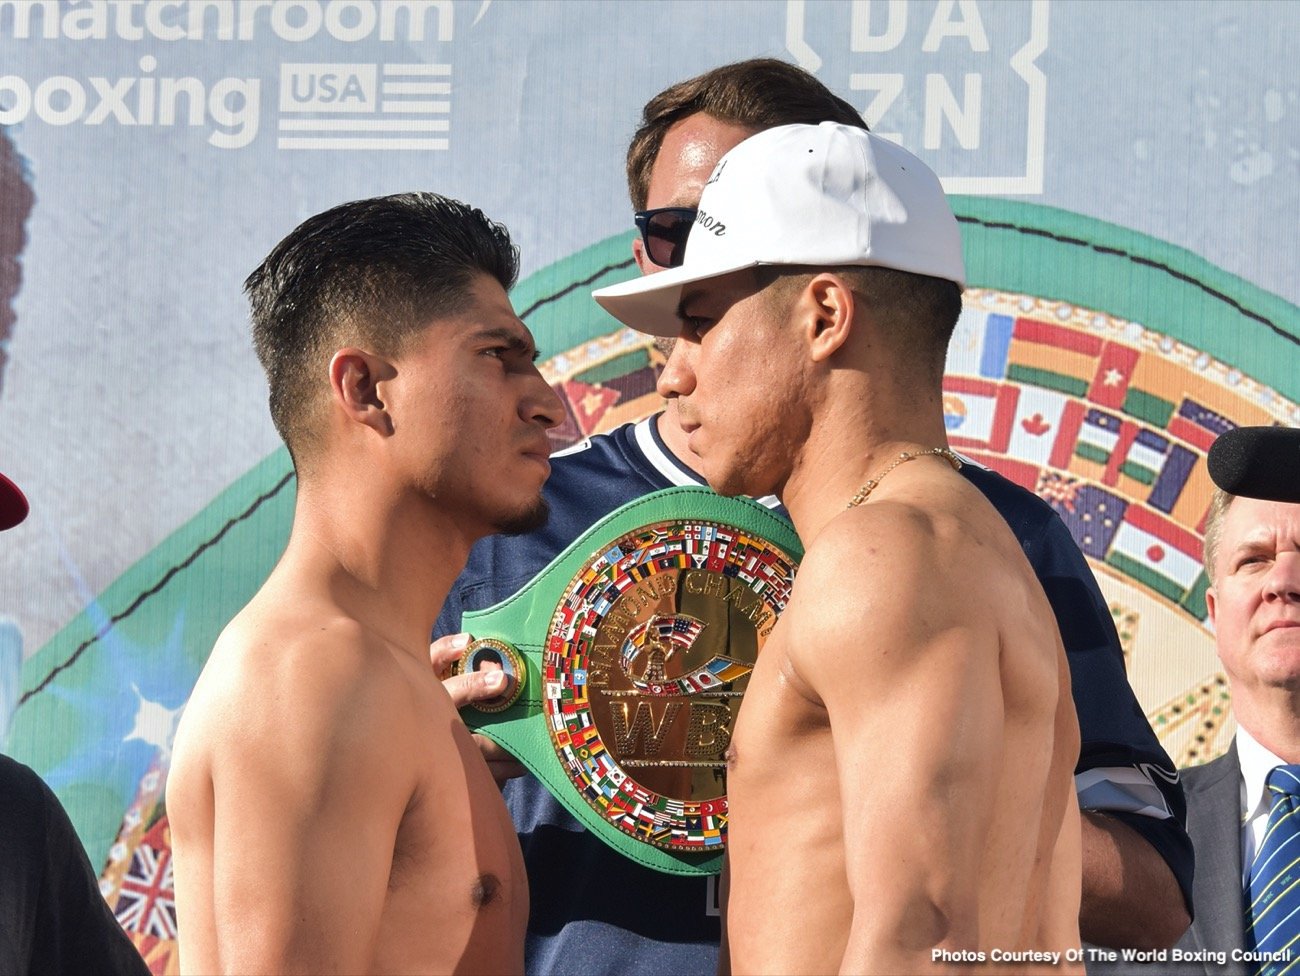 Jessie Vargas, Manny Pacquiao, Mikey Garcia boxing photo and news image